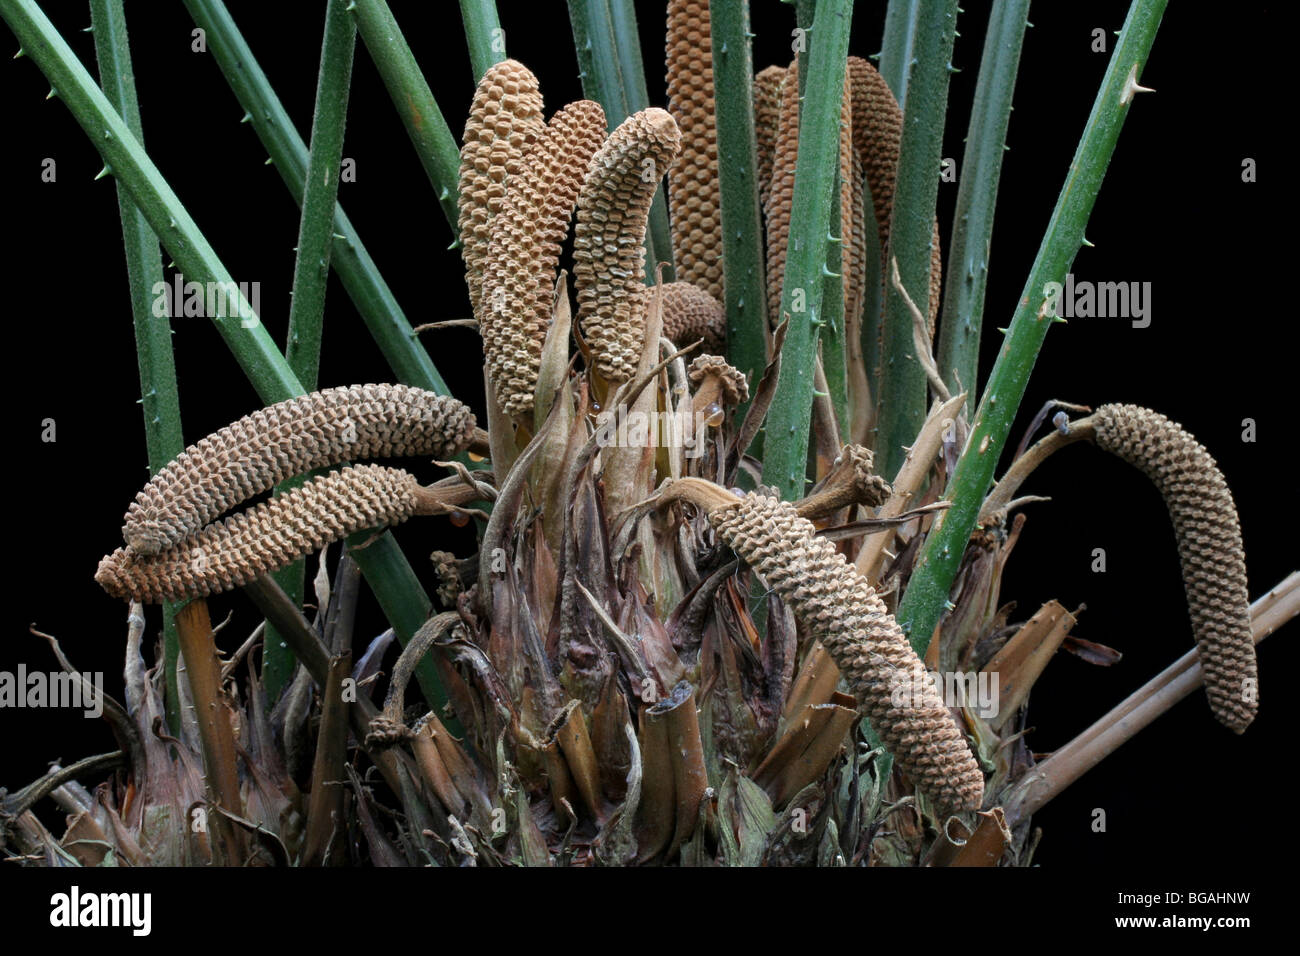 Close up of the male cones of a cycad, Zamia skinneri. Stock Photo